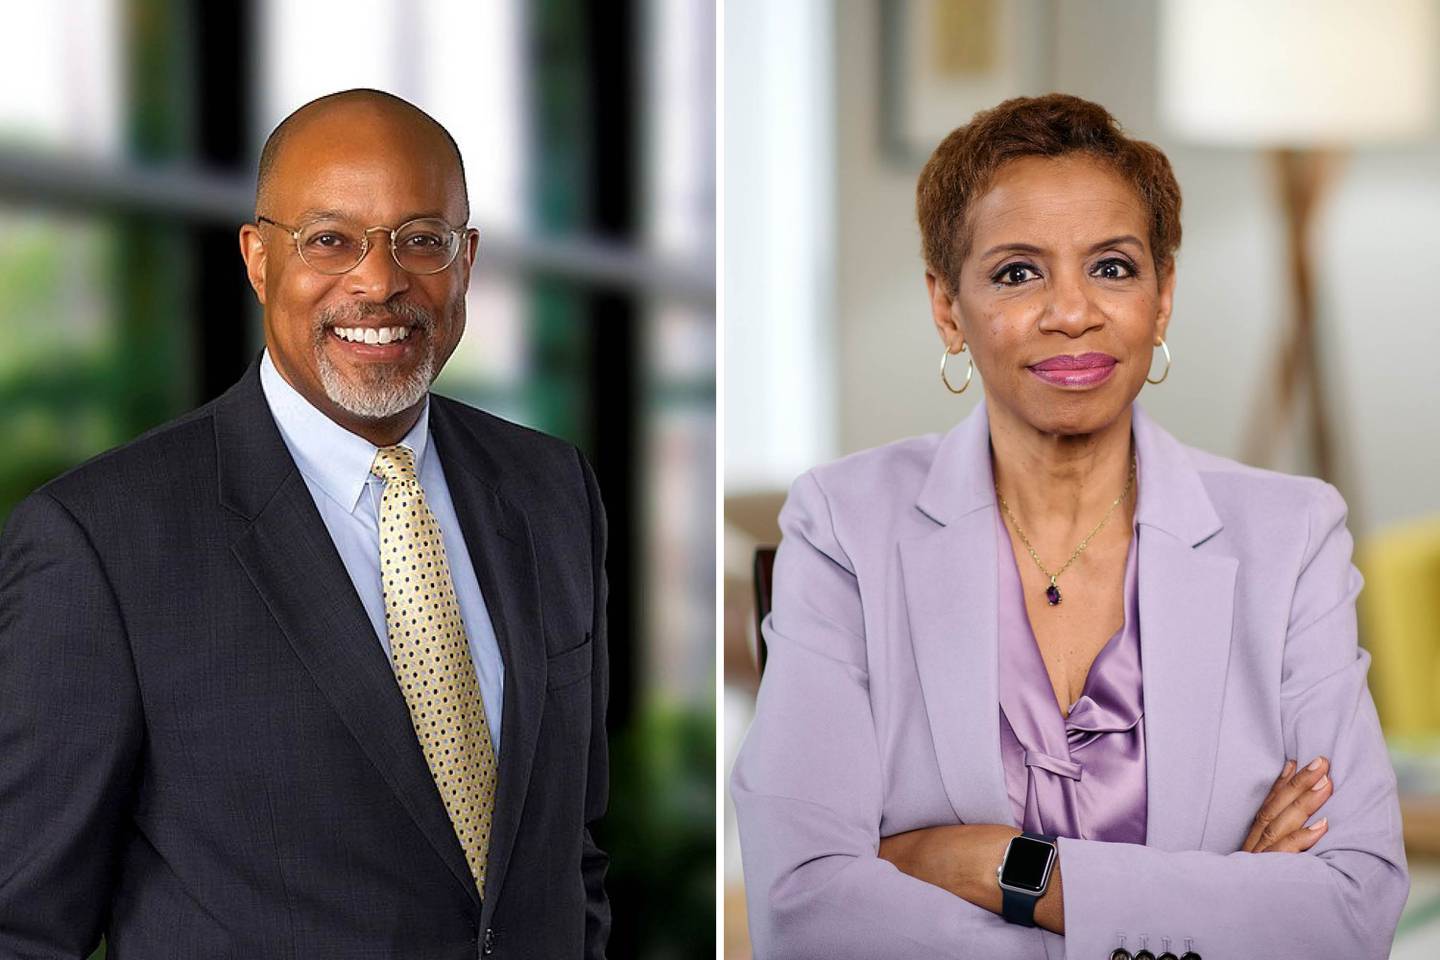 Donna Edwards and Glenn Ivey, Democratic candidates in the 4th Congressional District